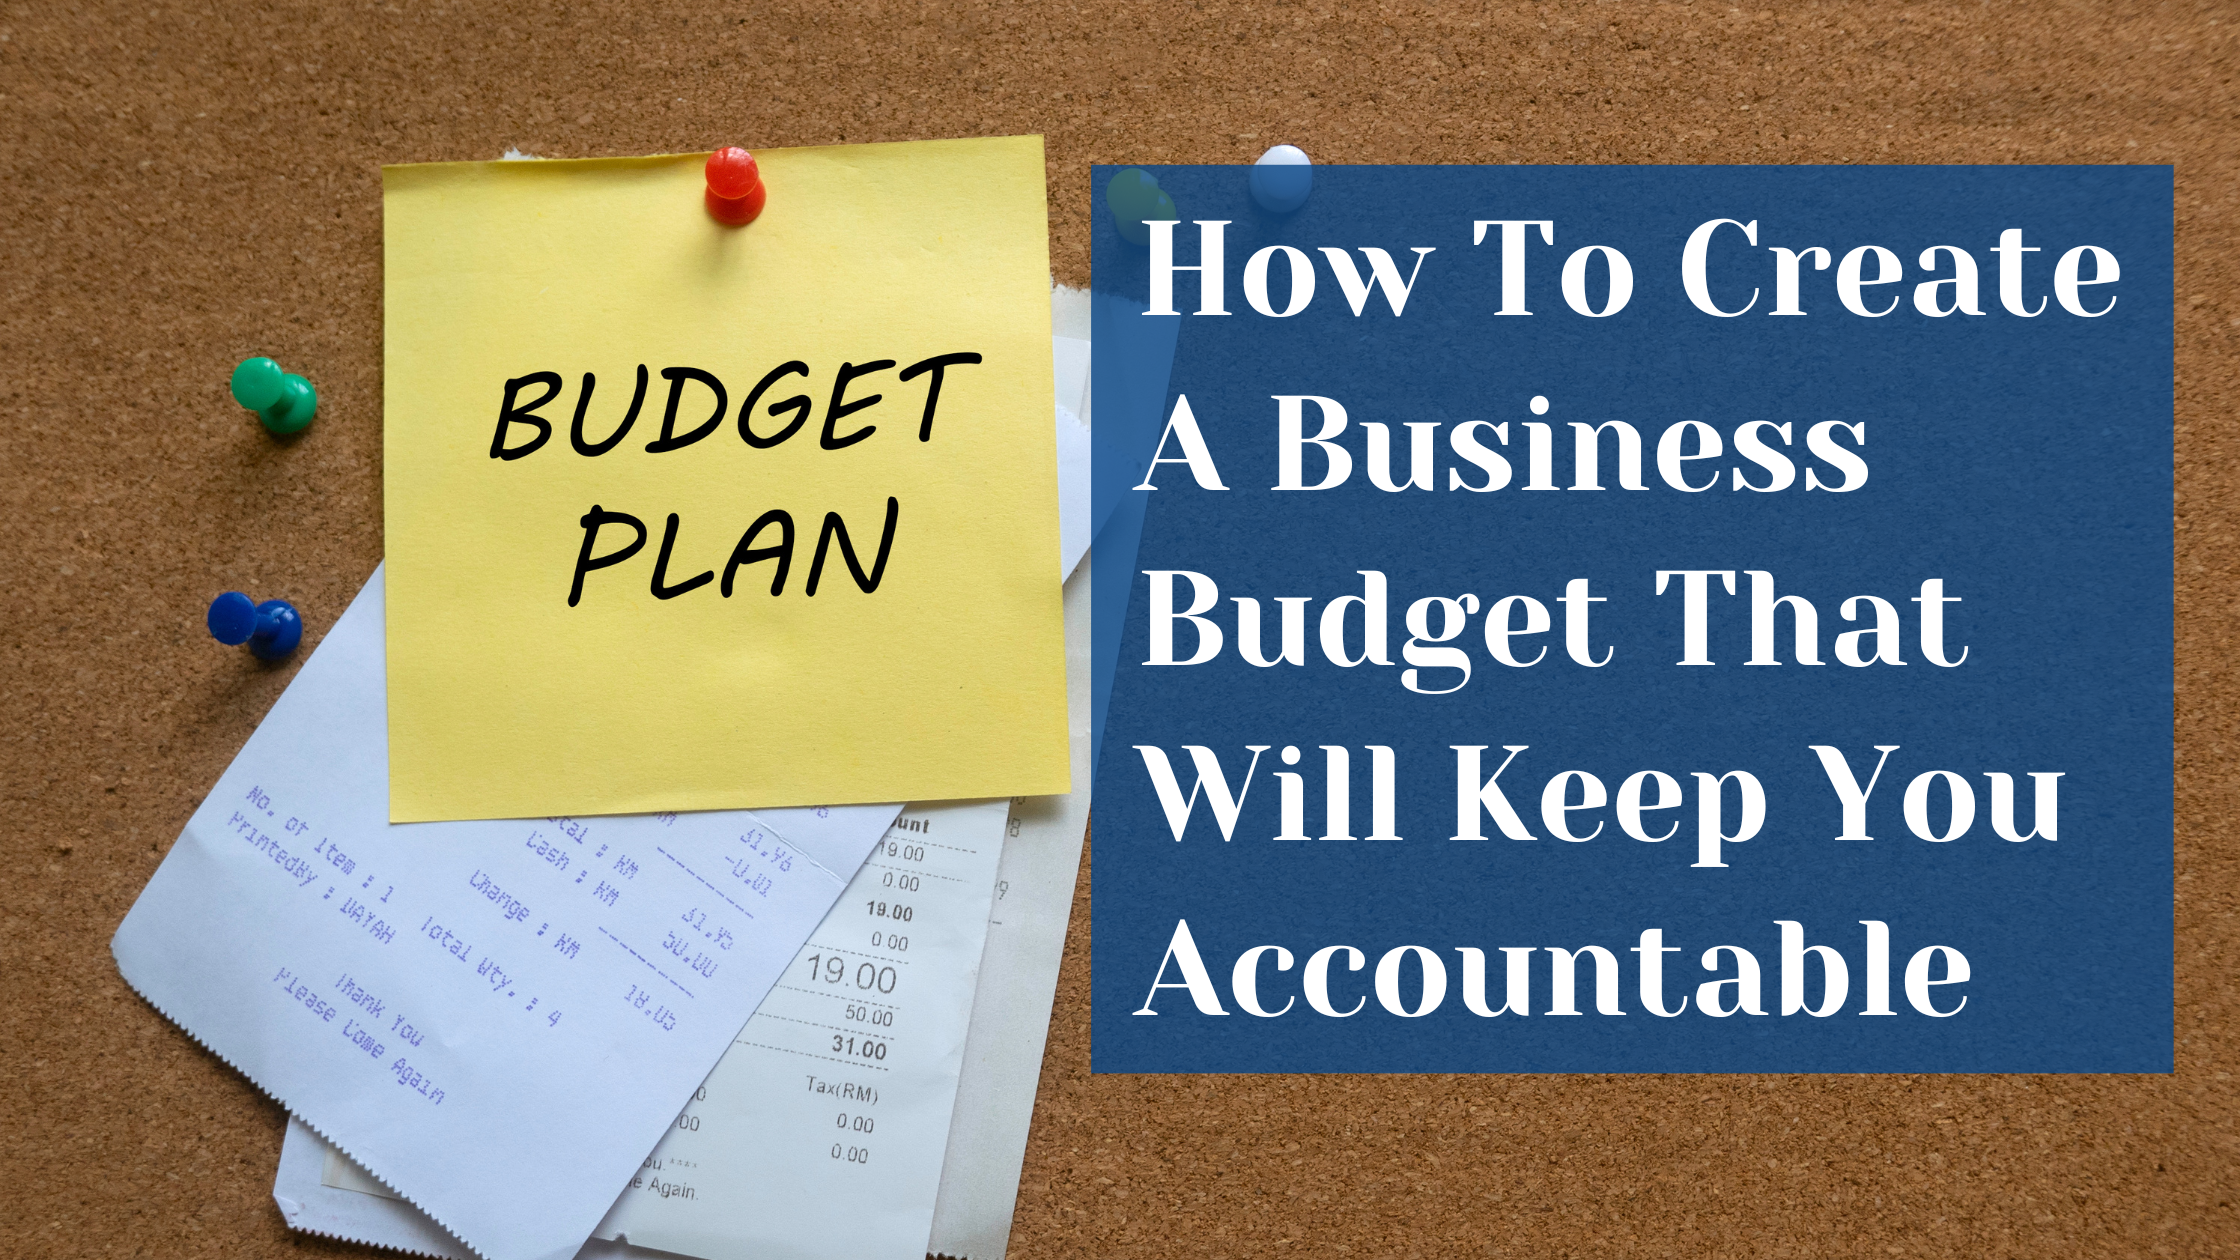 How To Create A Business Budget That Will Keep You Accountable